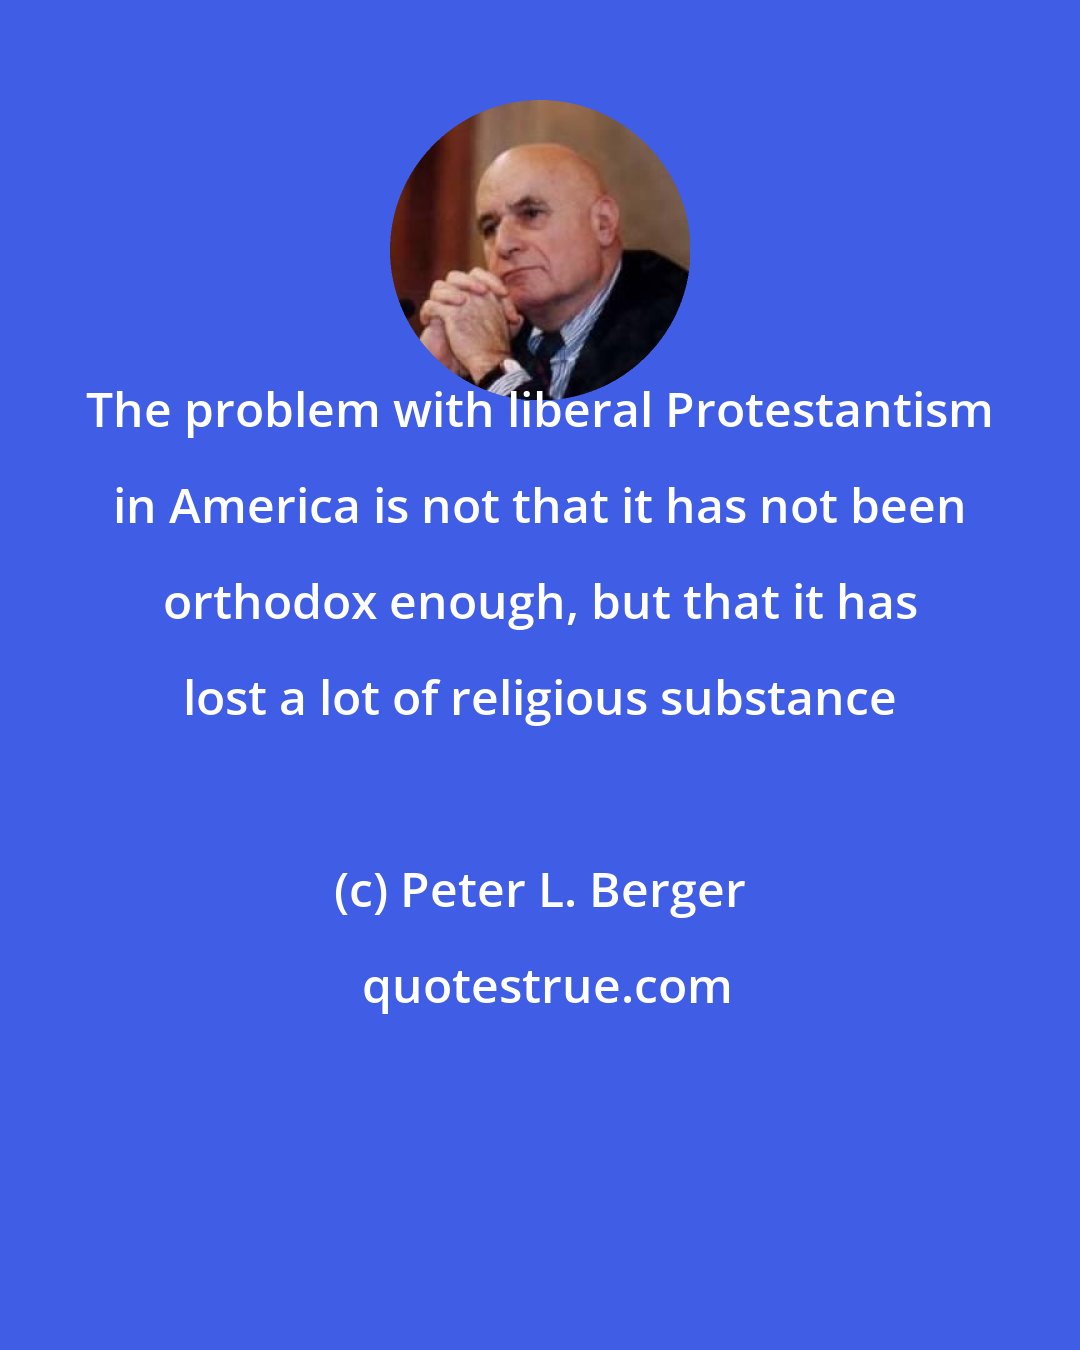 Peter L. Berger: The problem with liberal Protestantism in America is not that it has not been orthodox enough, but that it has lost a lot of religious substance